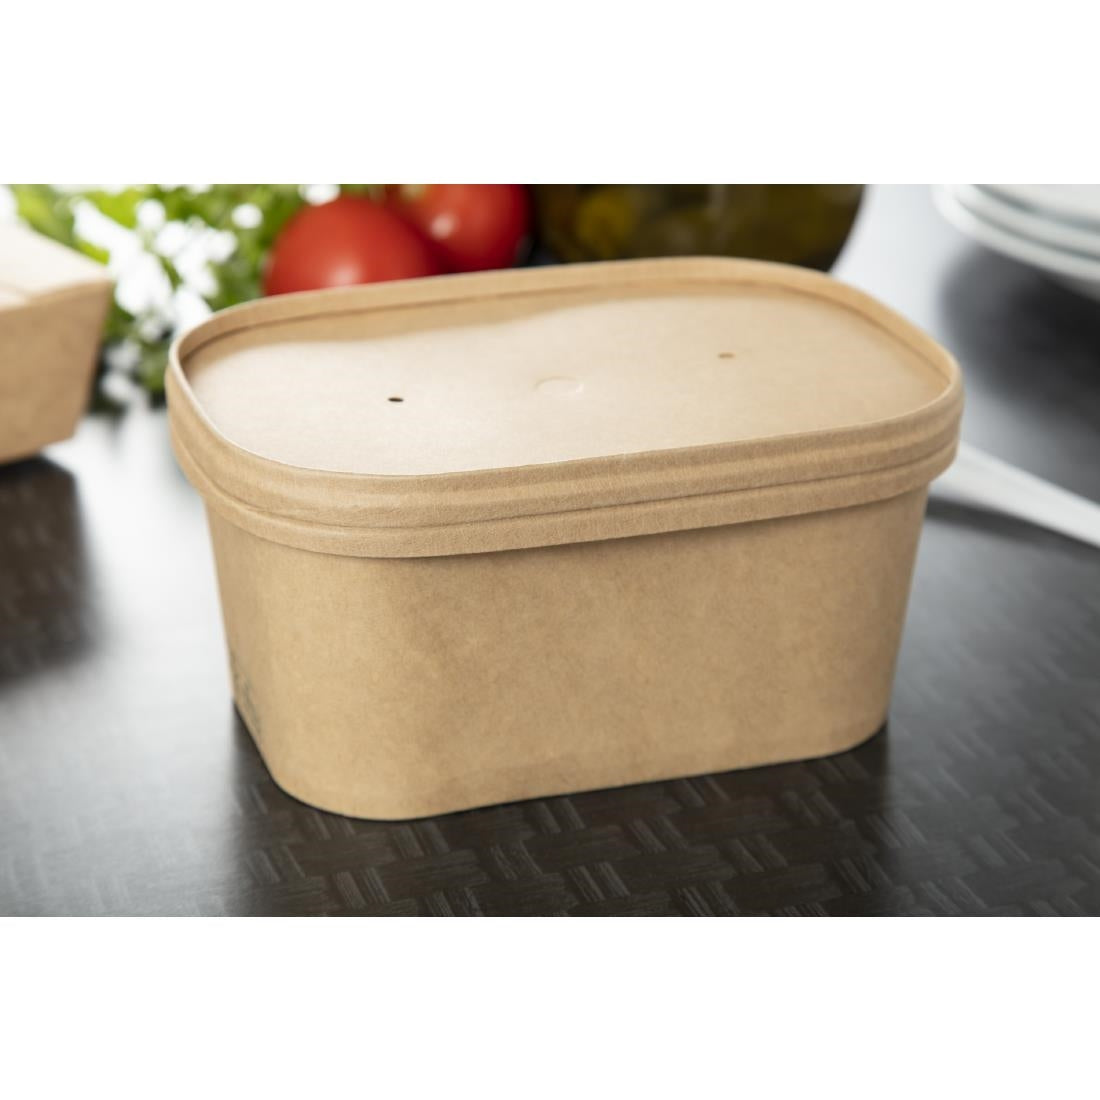 FP459 Colpac Stagione Recyclable Microwavable Food Boxes 1Ltr / 35oz (Pack of 300) JD Catering Equipment Solutions Ltd